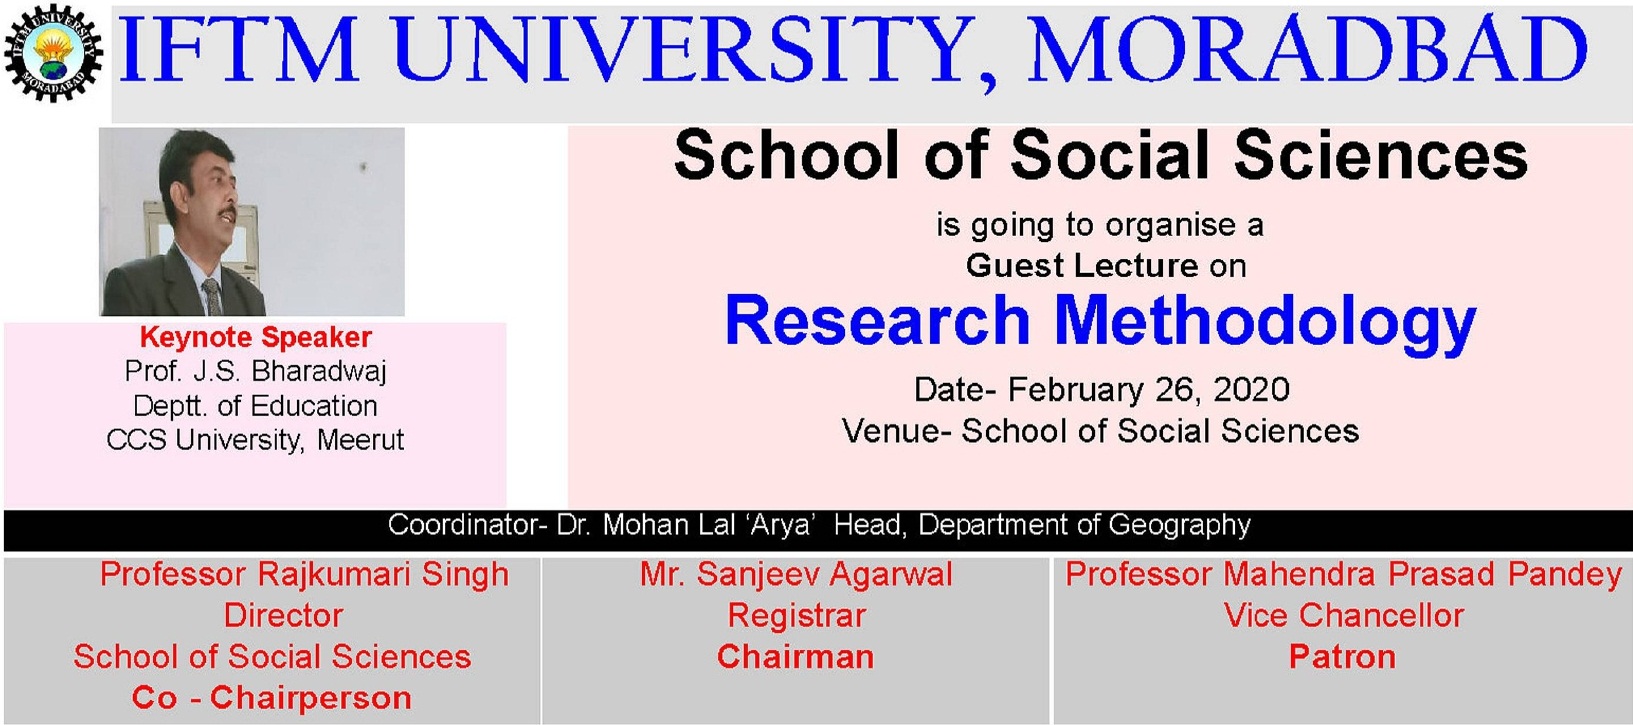 Guest Lecture on Research Methodology